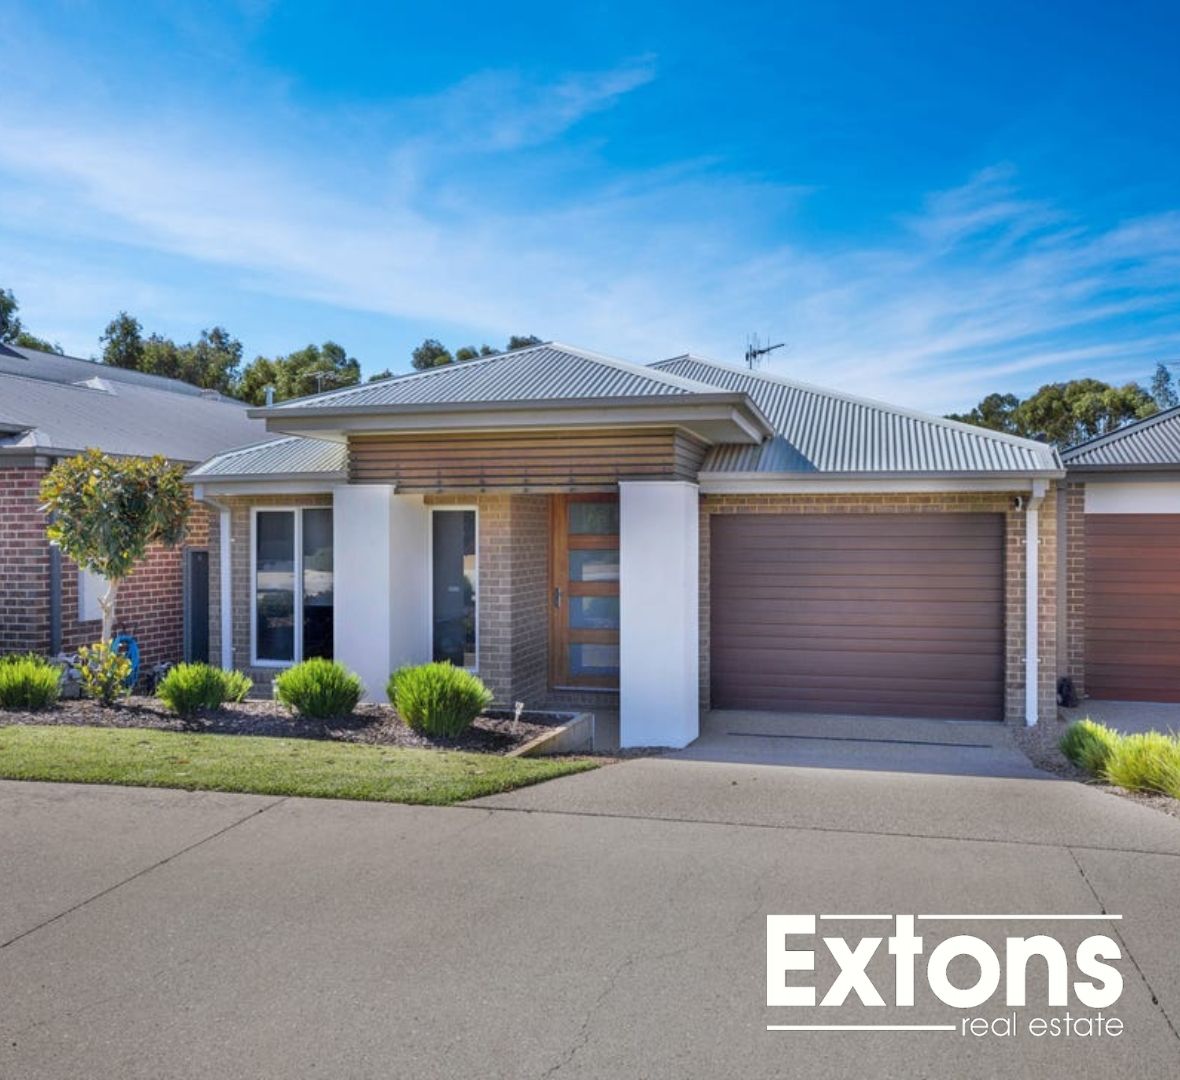 3 bedrooms House in 56 Robinsons Way YARRAWONGA VIC, 3730